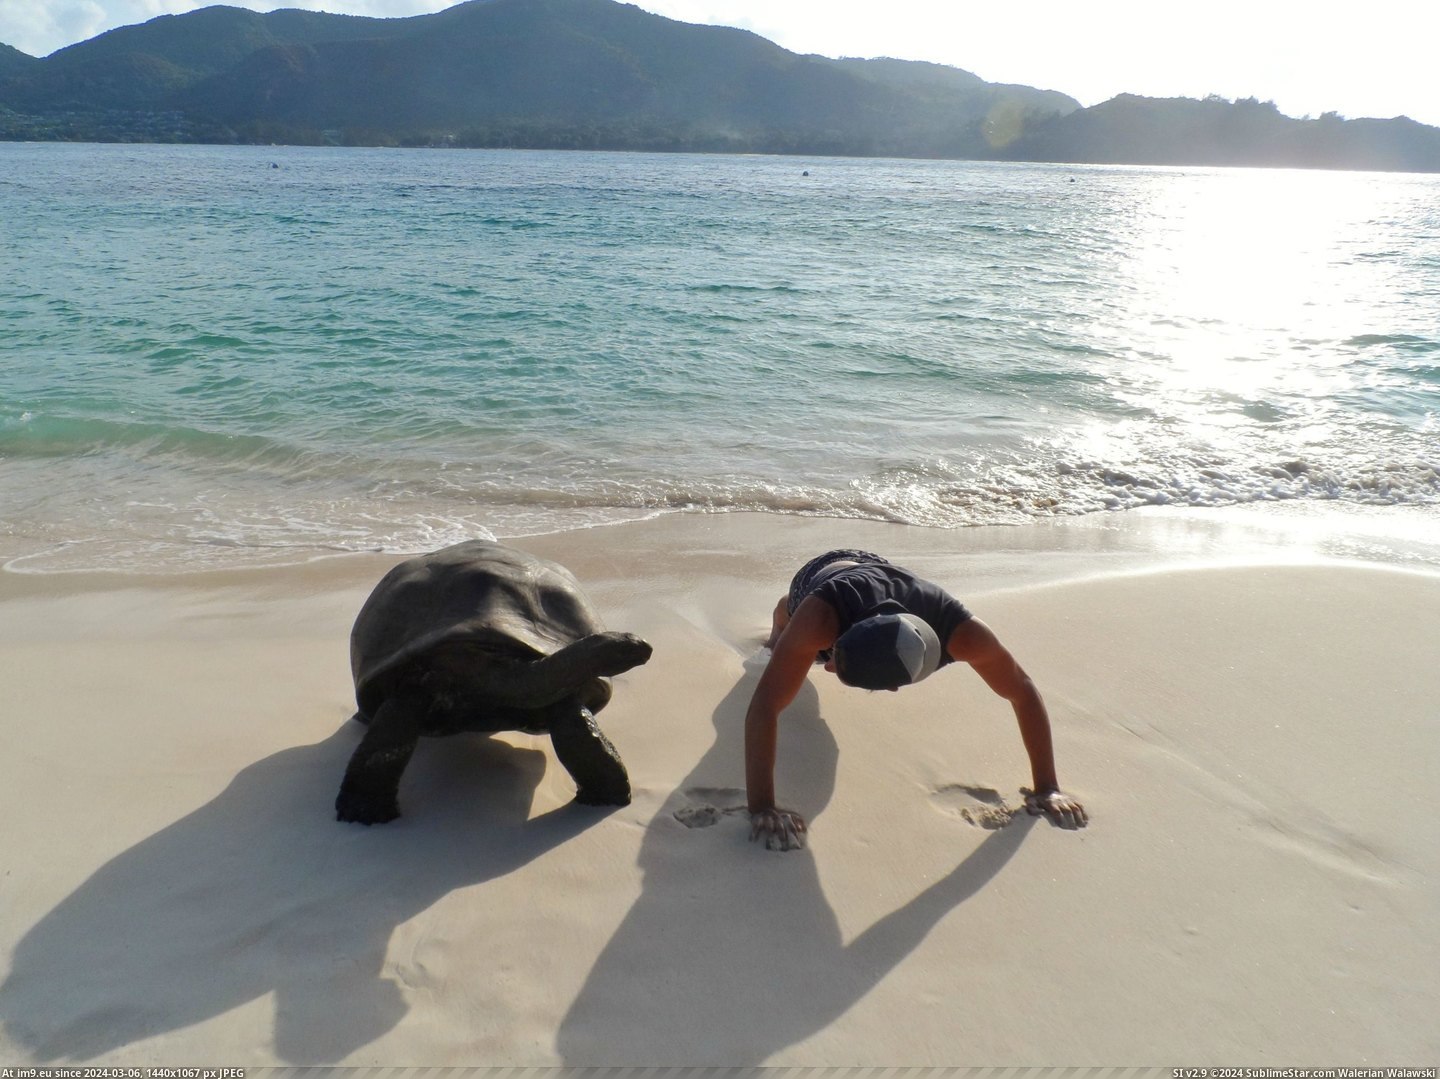 #Small #Island #Workout #Buddy #Boyfriend [Pics] Currently volunteering on a small island in the Seychelles - my boyfriend found a new workout buddy! Pic. (Изображение из альбом My r/PICS favs))